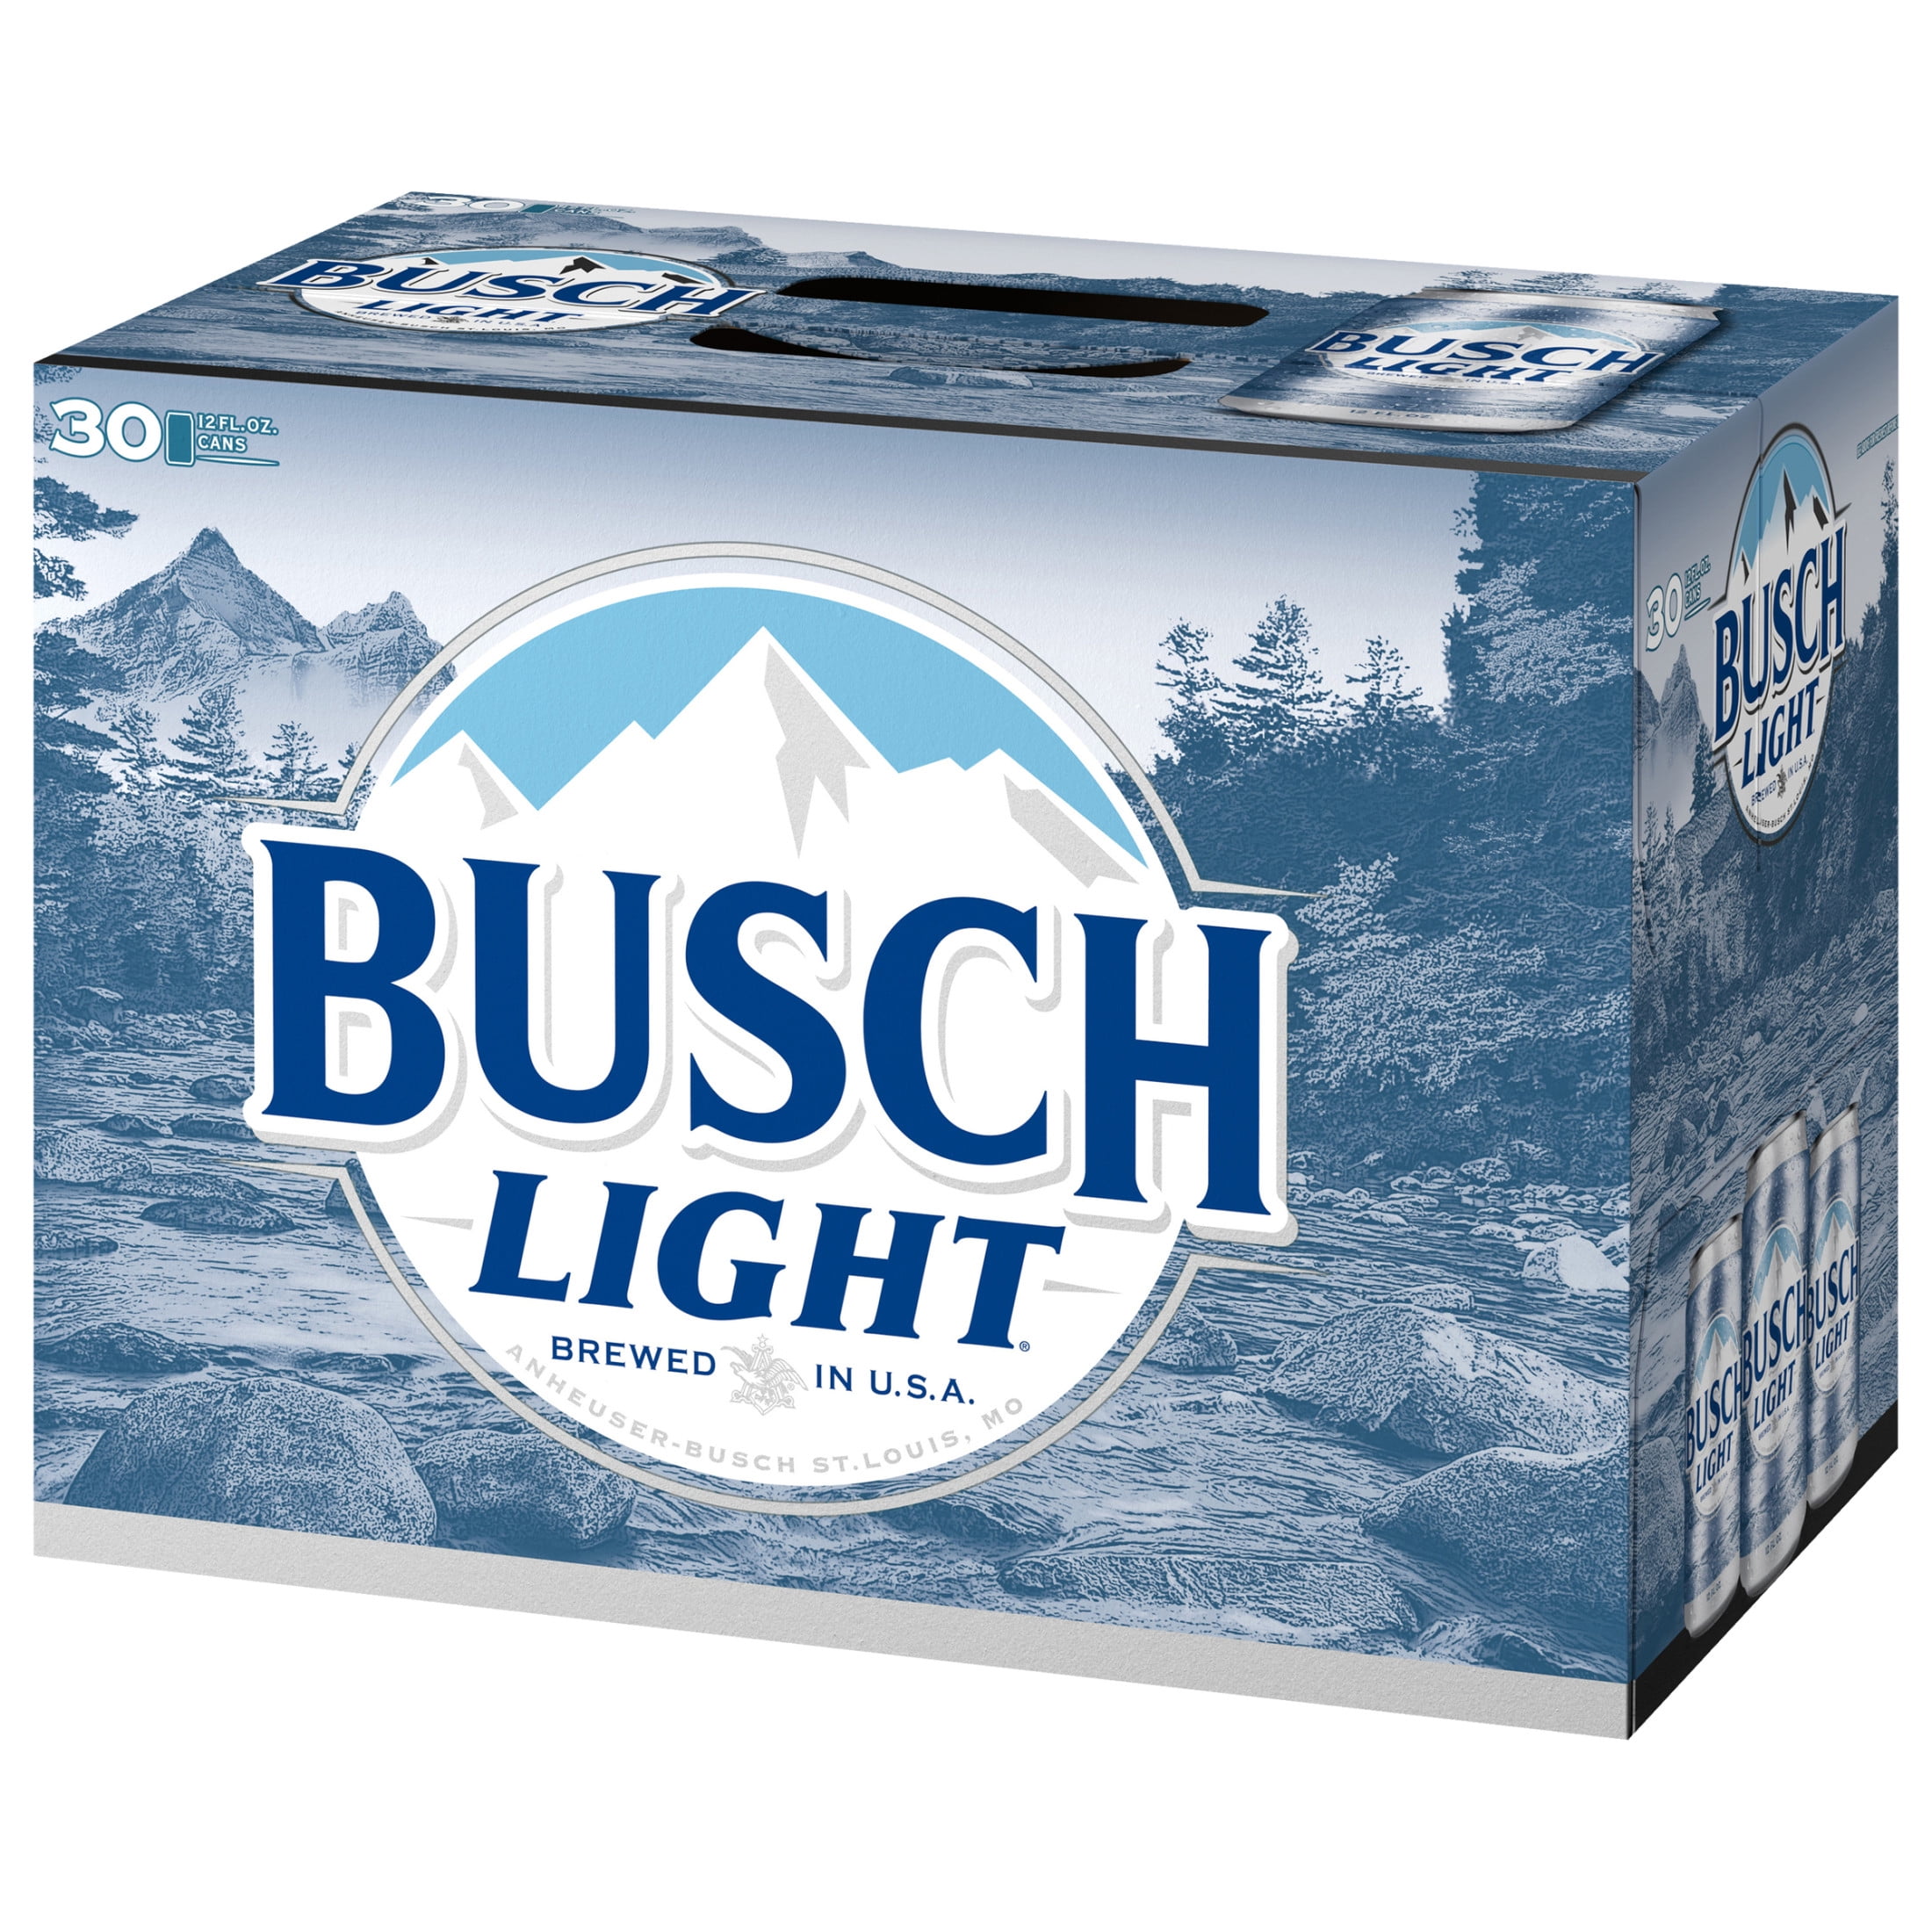 Busch Light Lager Domestic Beer 30 Pack